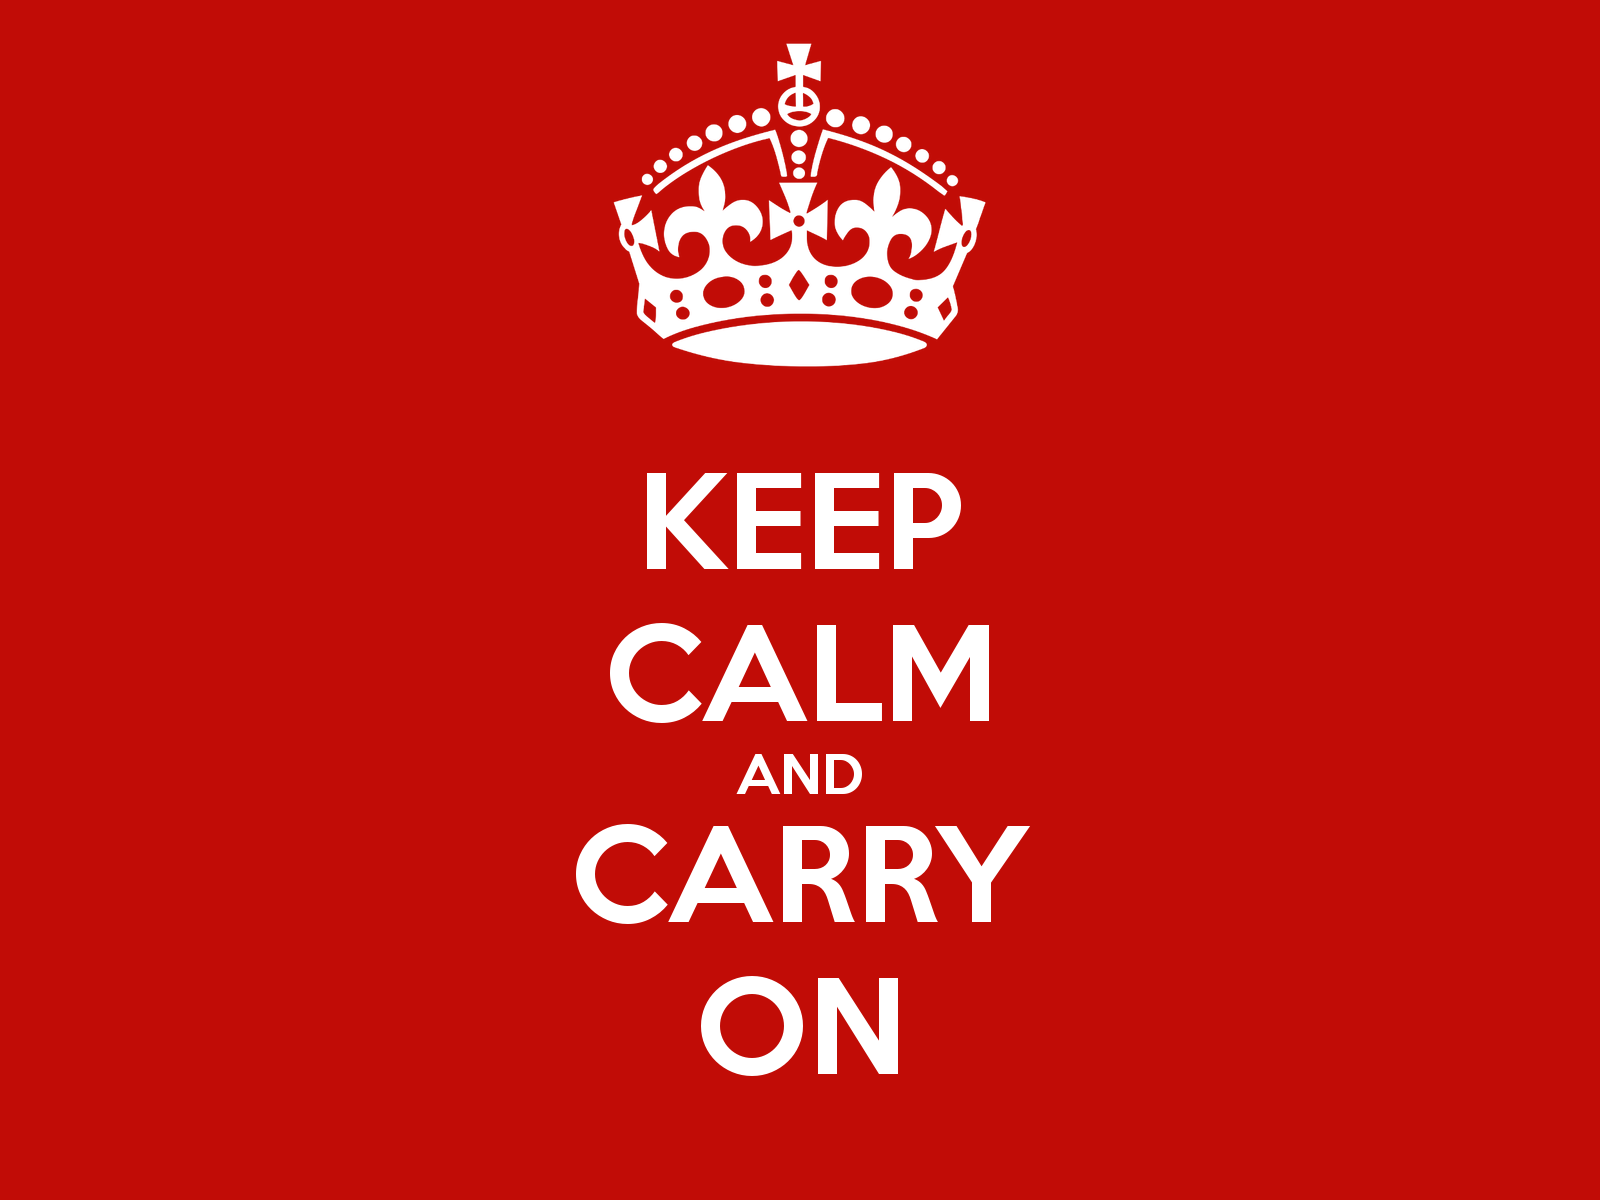 Brexit? Keep calm and carry on